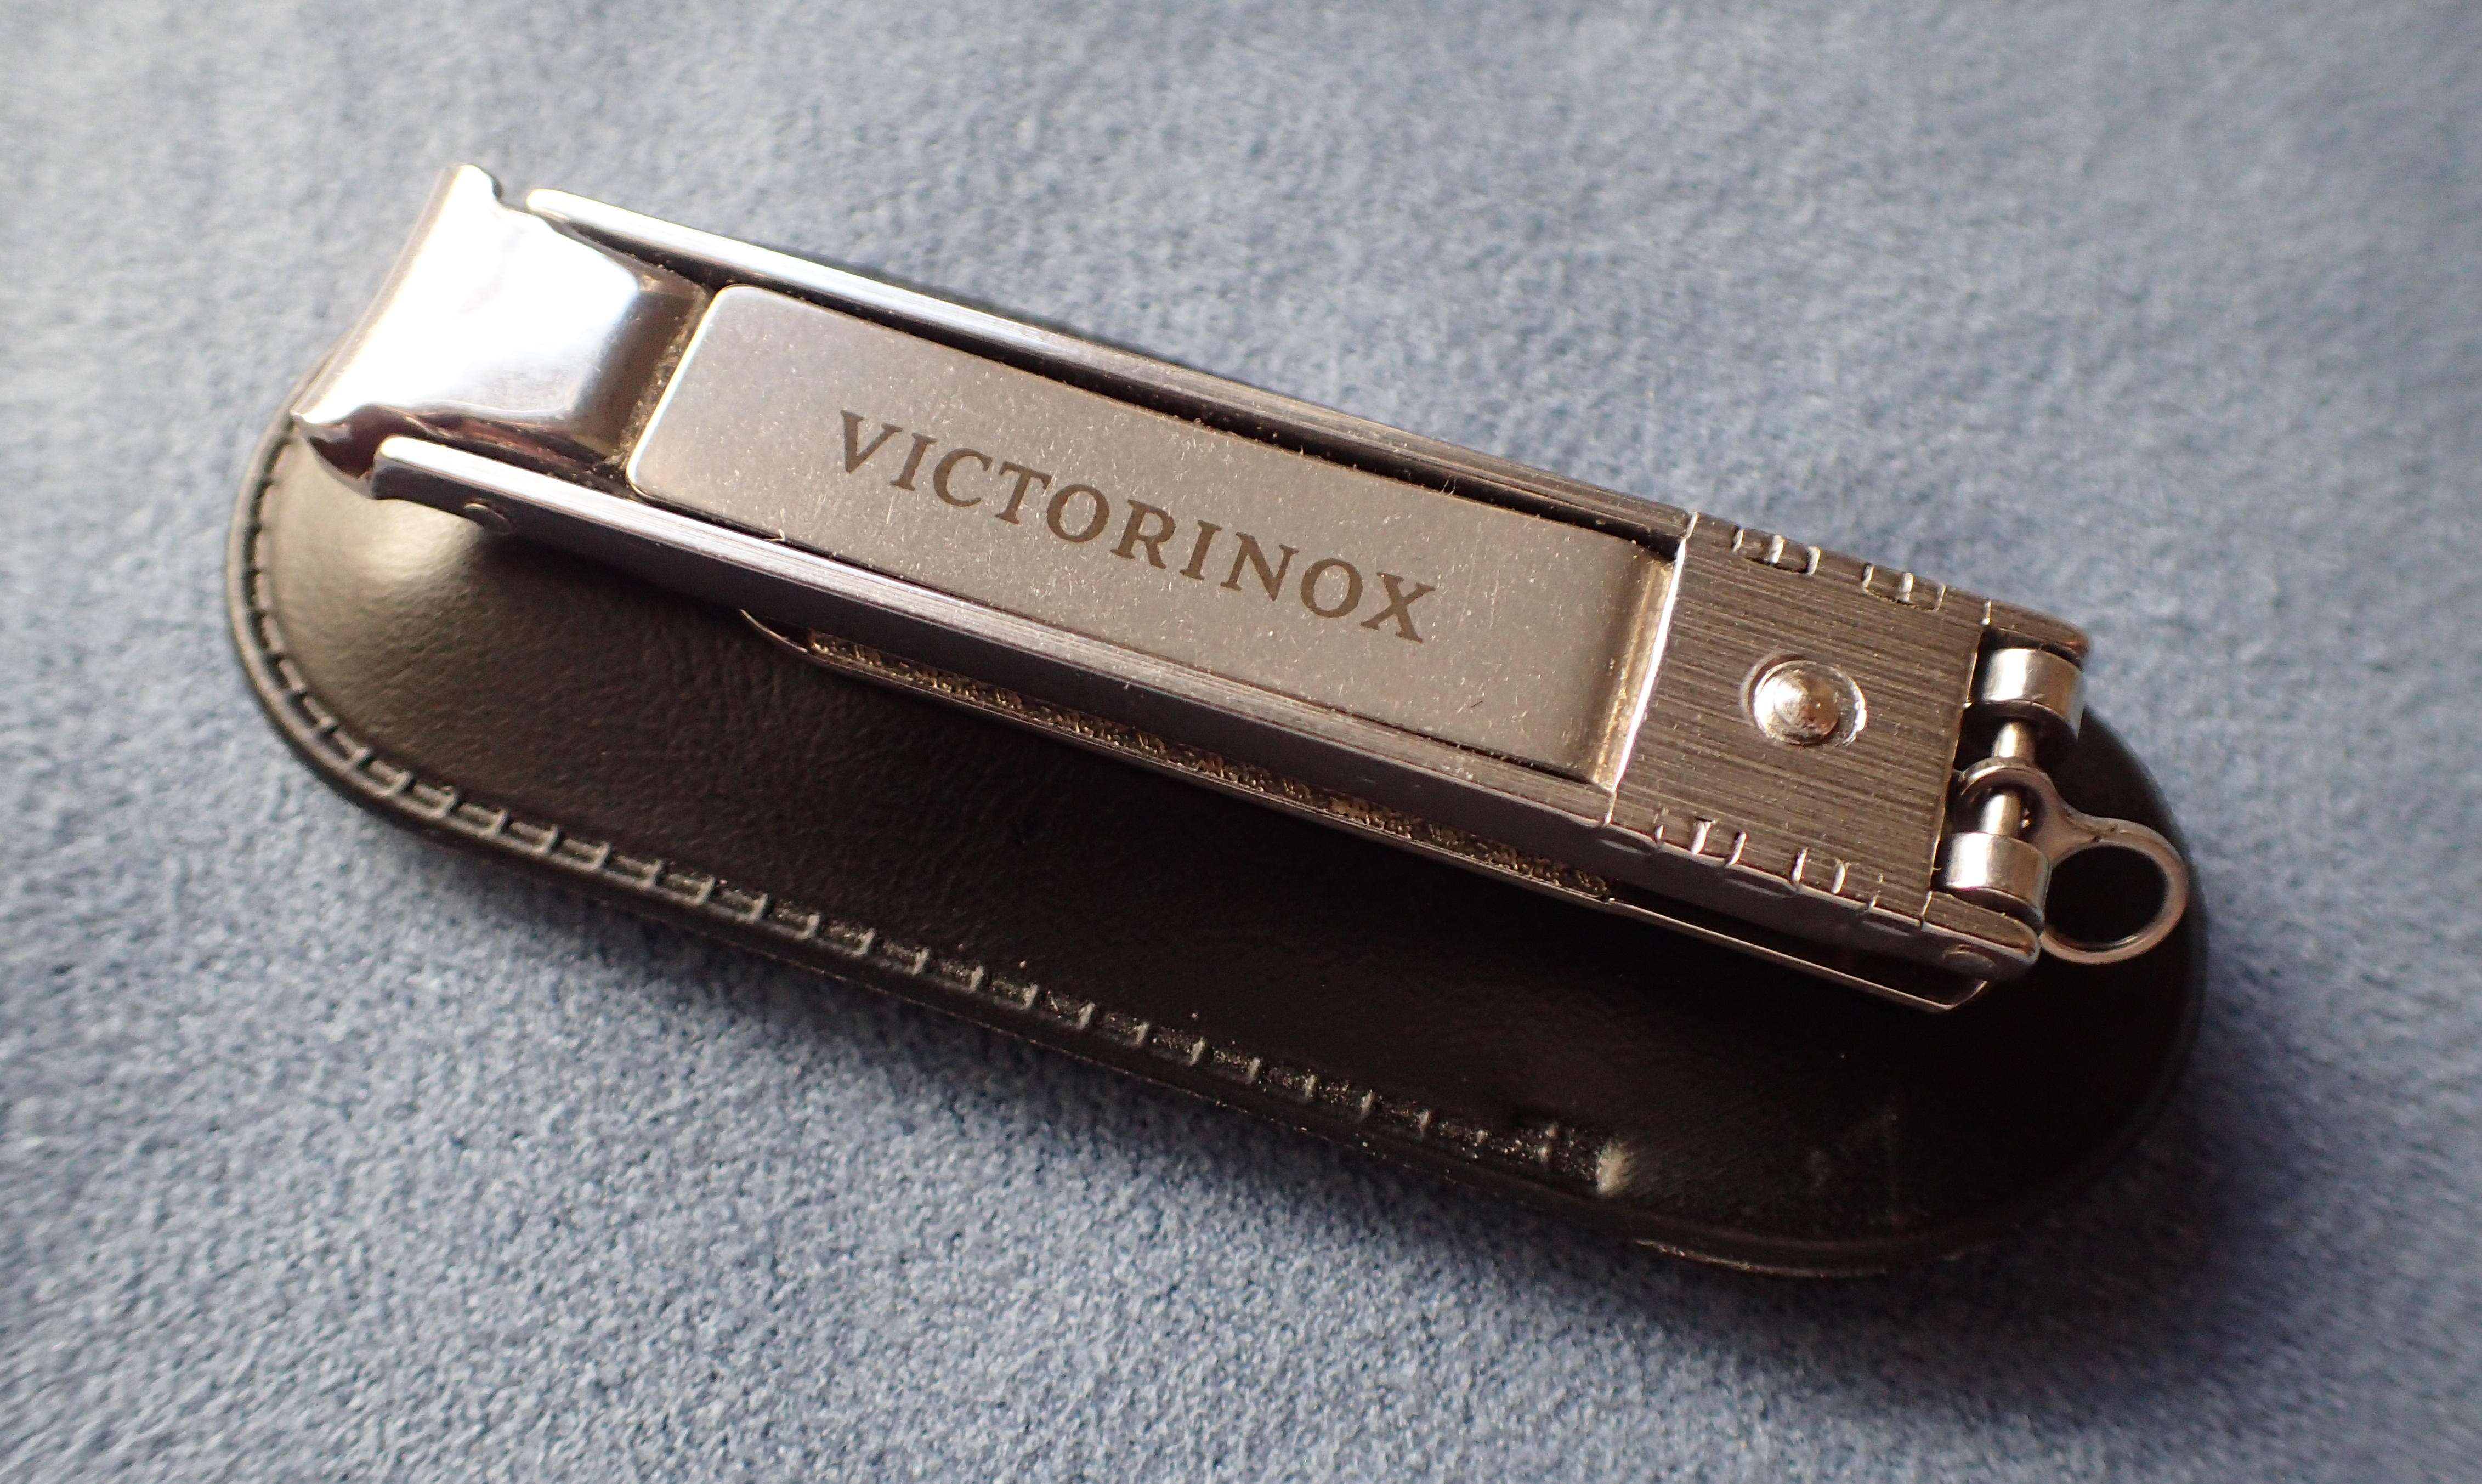 Victorinox Nail Clippers - Folding Stainless Steel Red Grip -Made In  Switzerland | eBay